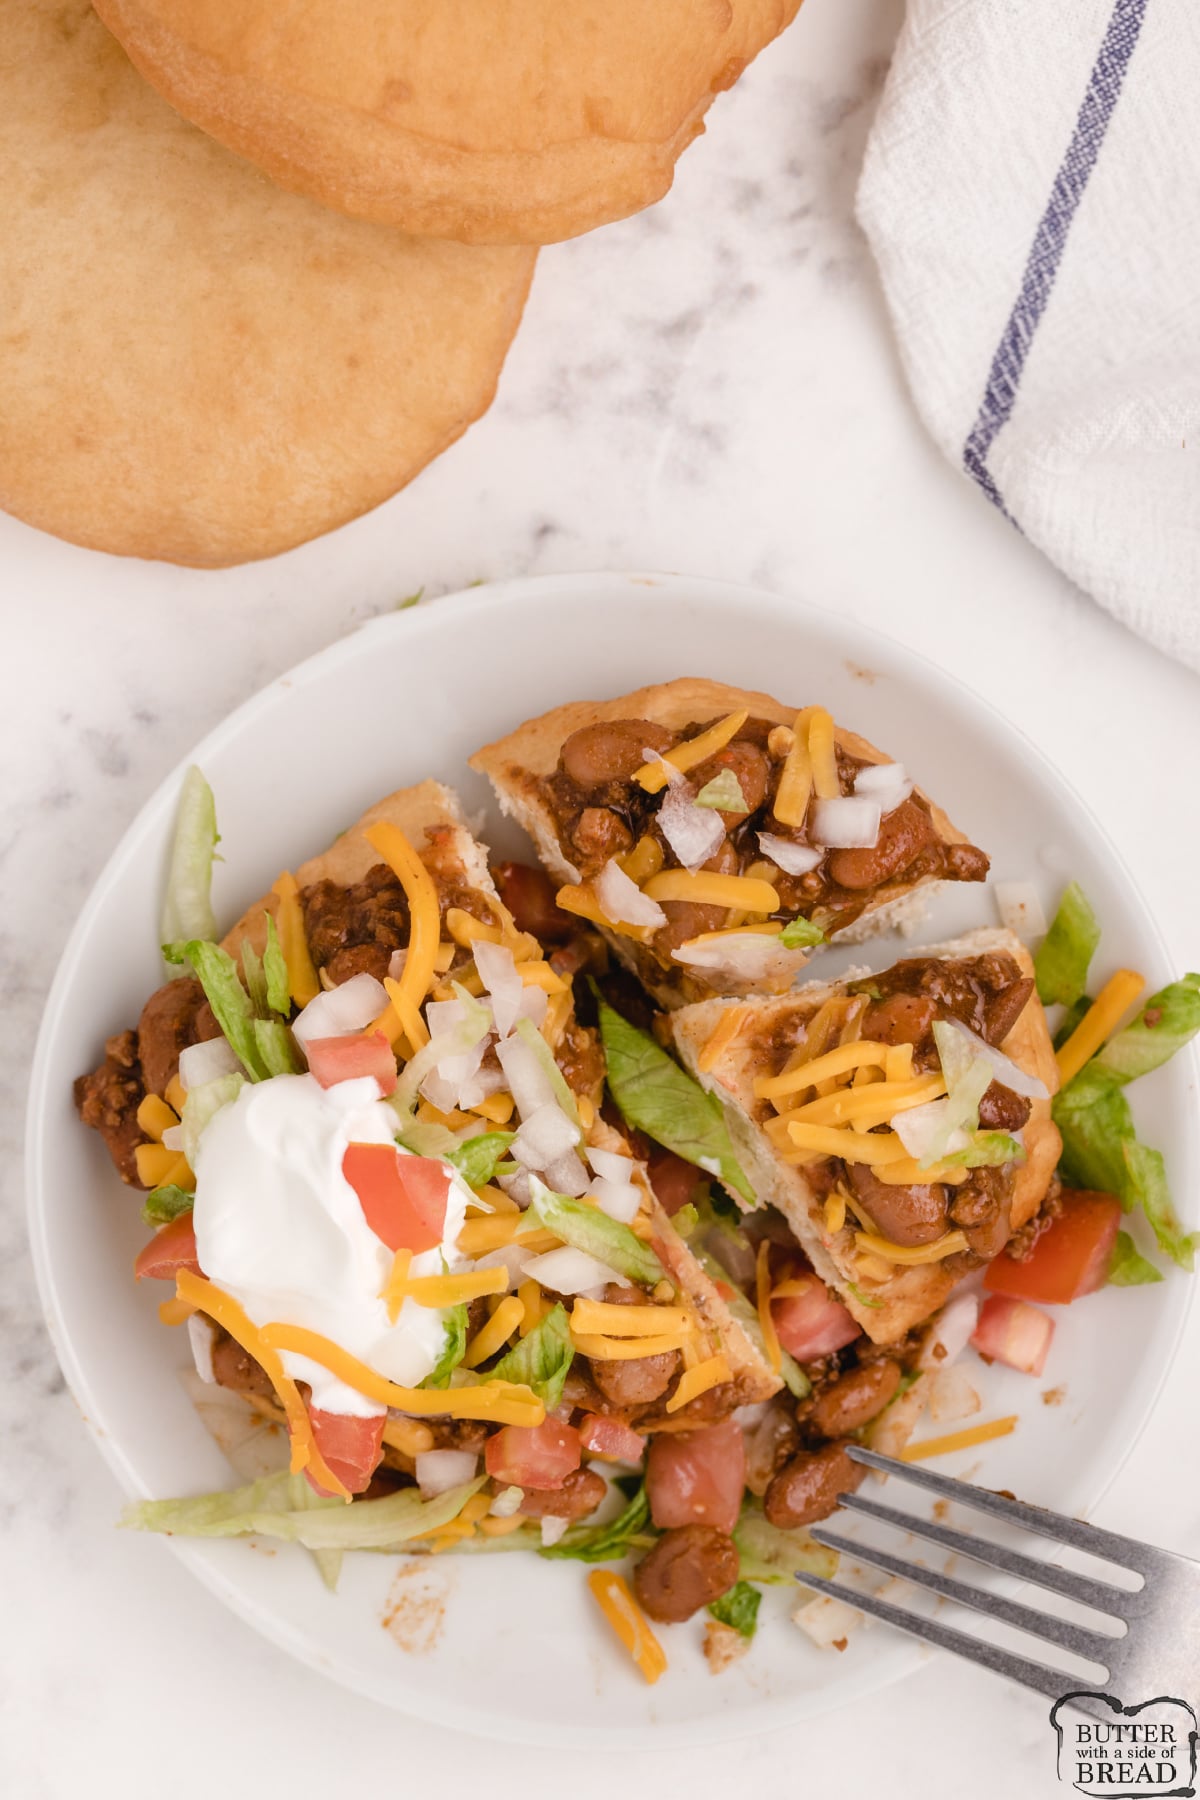 Navajo Tacos topped with chili, cheese, sour cream, lettuce and tomatoes